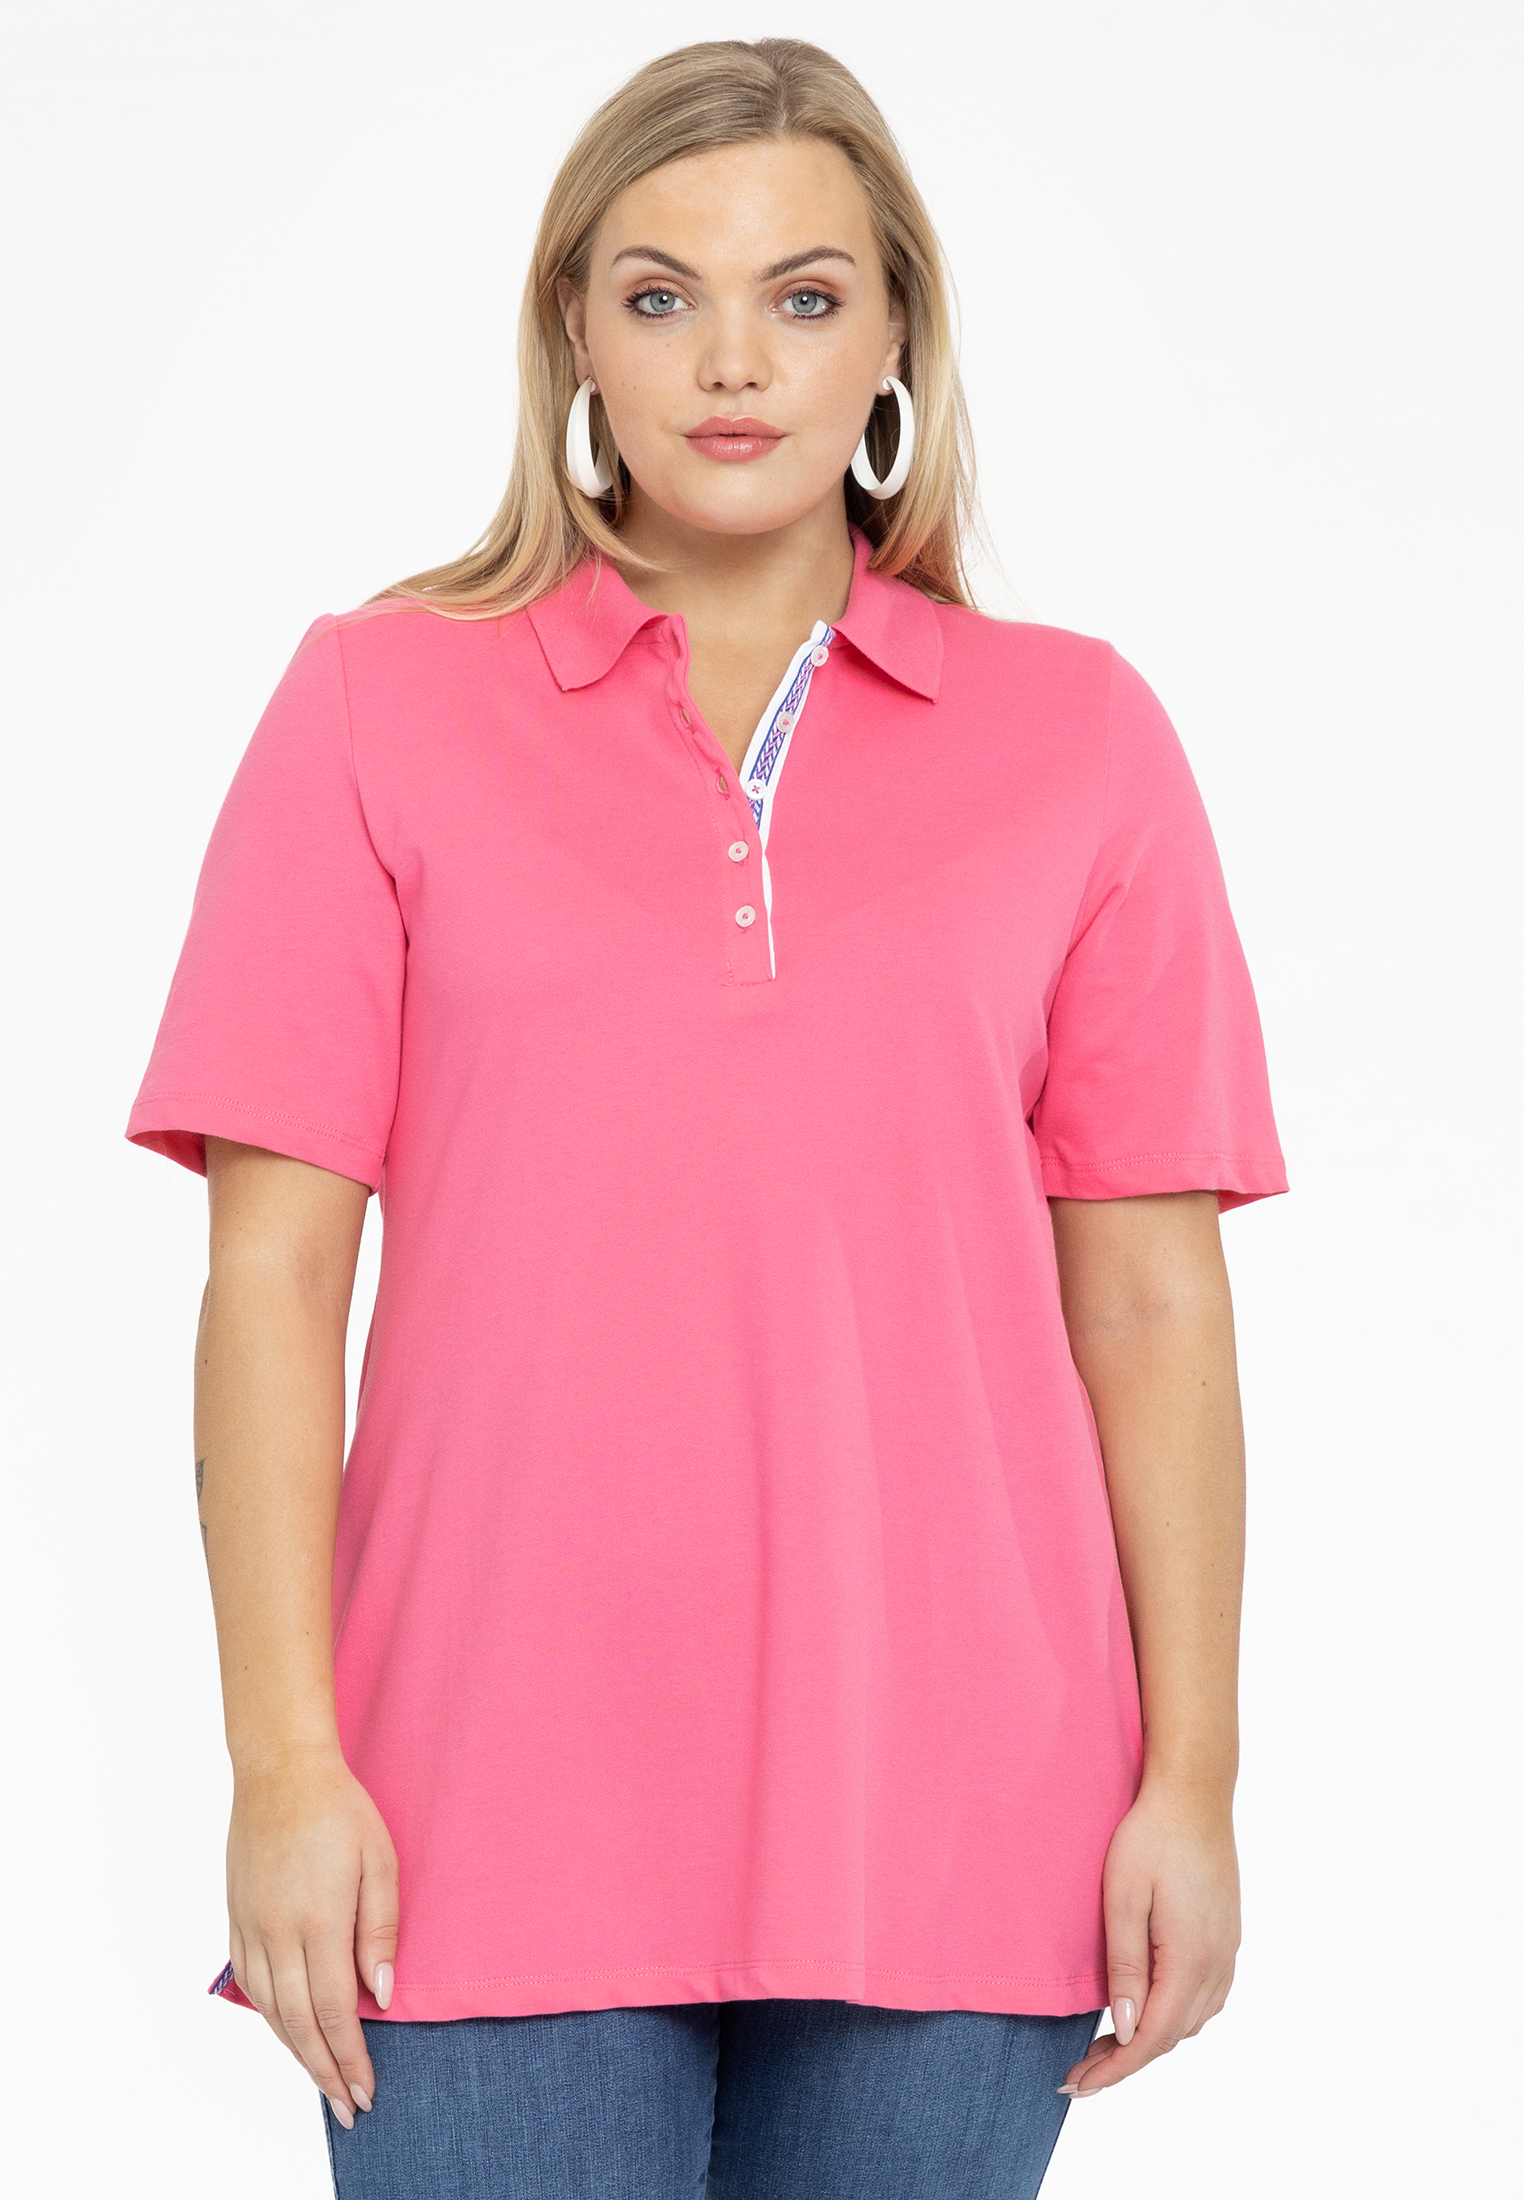 Polo-shirt flare 42/44 pink